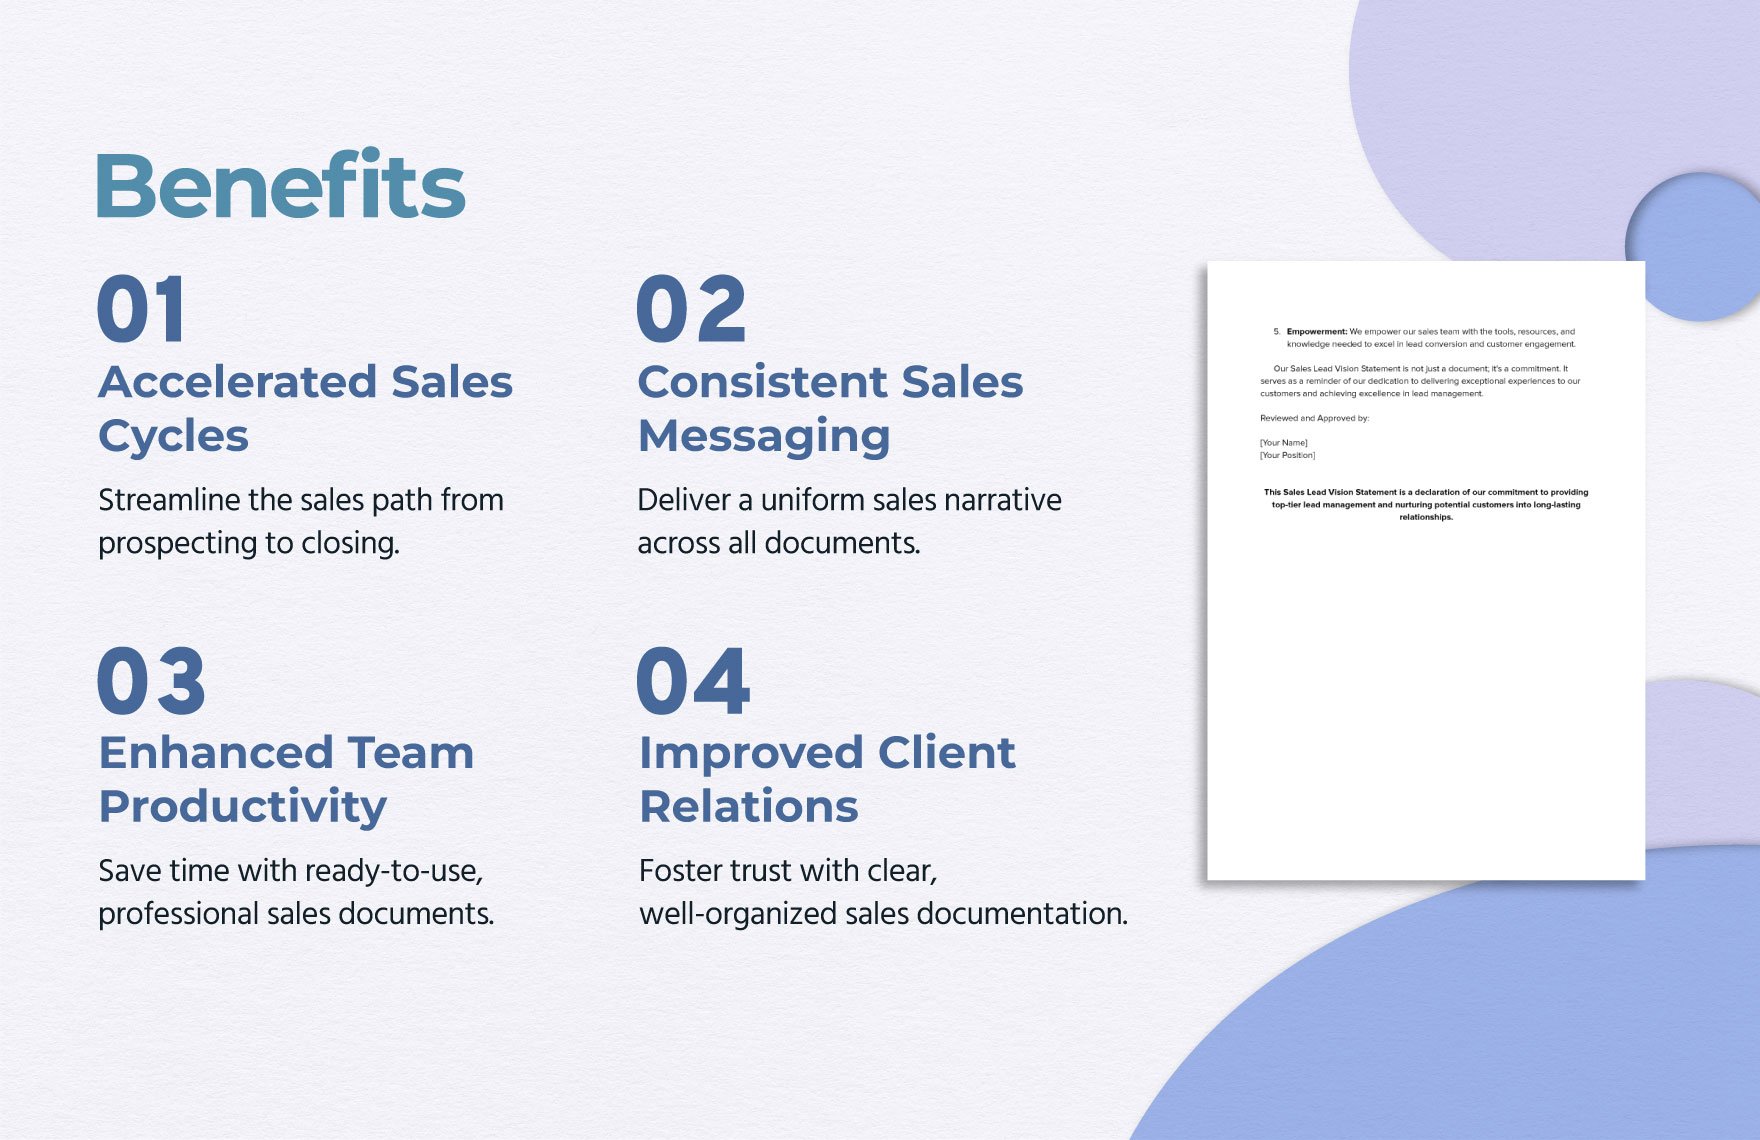 Sales Lead Vision Statement Template